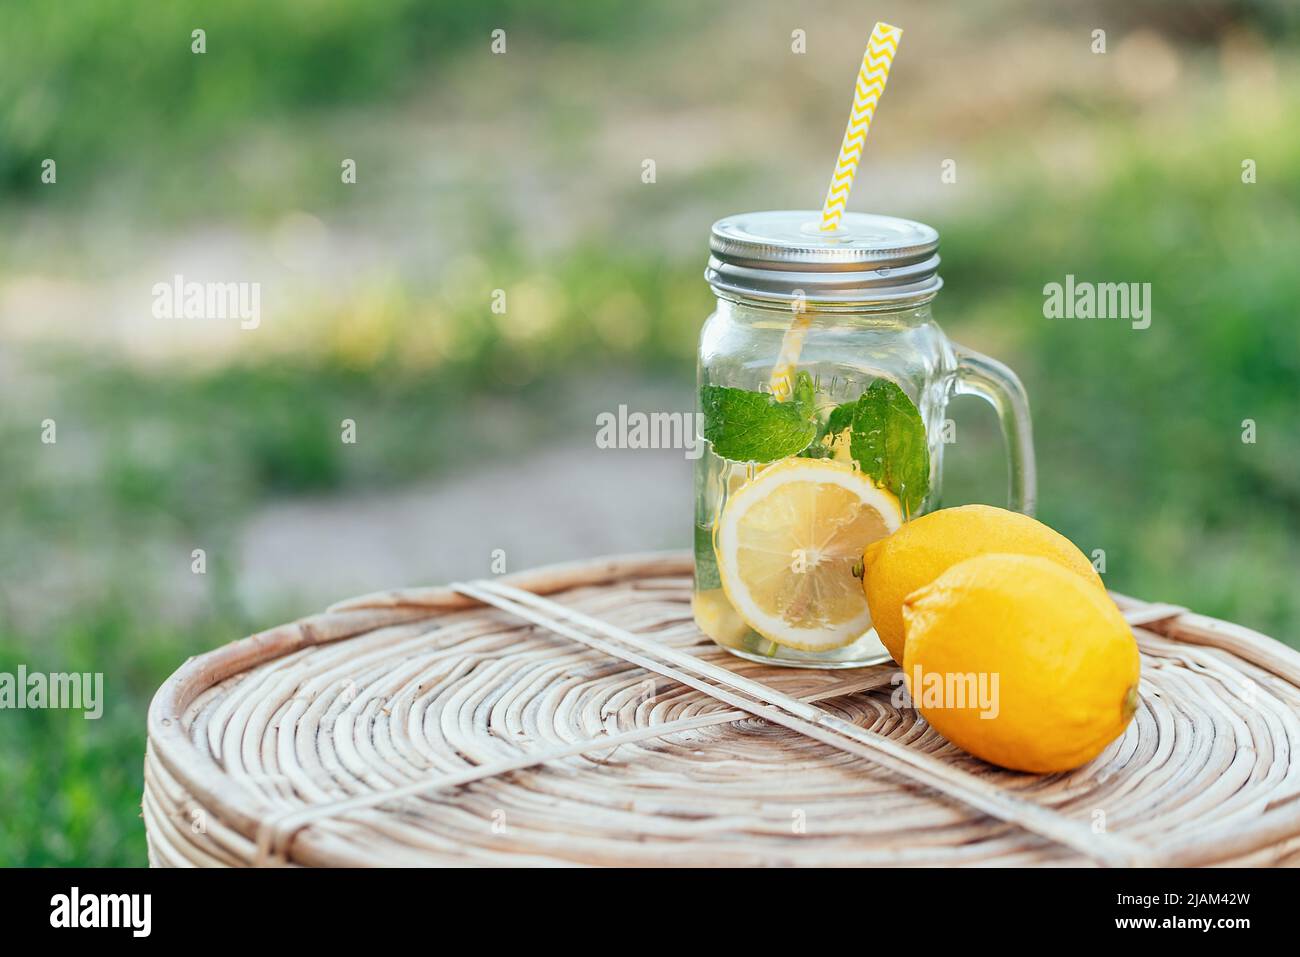 Plate with ripe fresh lemons and lemonade sassy water. Vitamins concept. copy space. Strengthening immunity concept. Tropical fruit. Organic citrus fruits for a healthy diet. Stock Photo